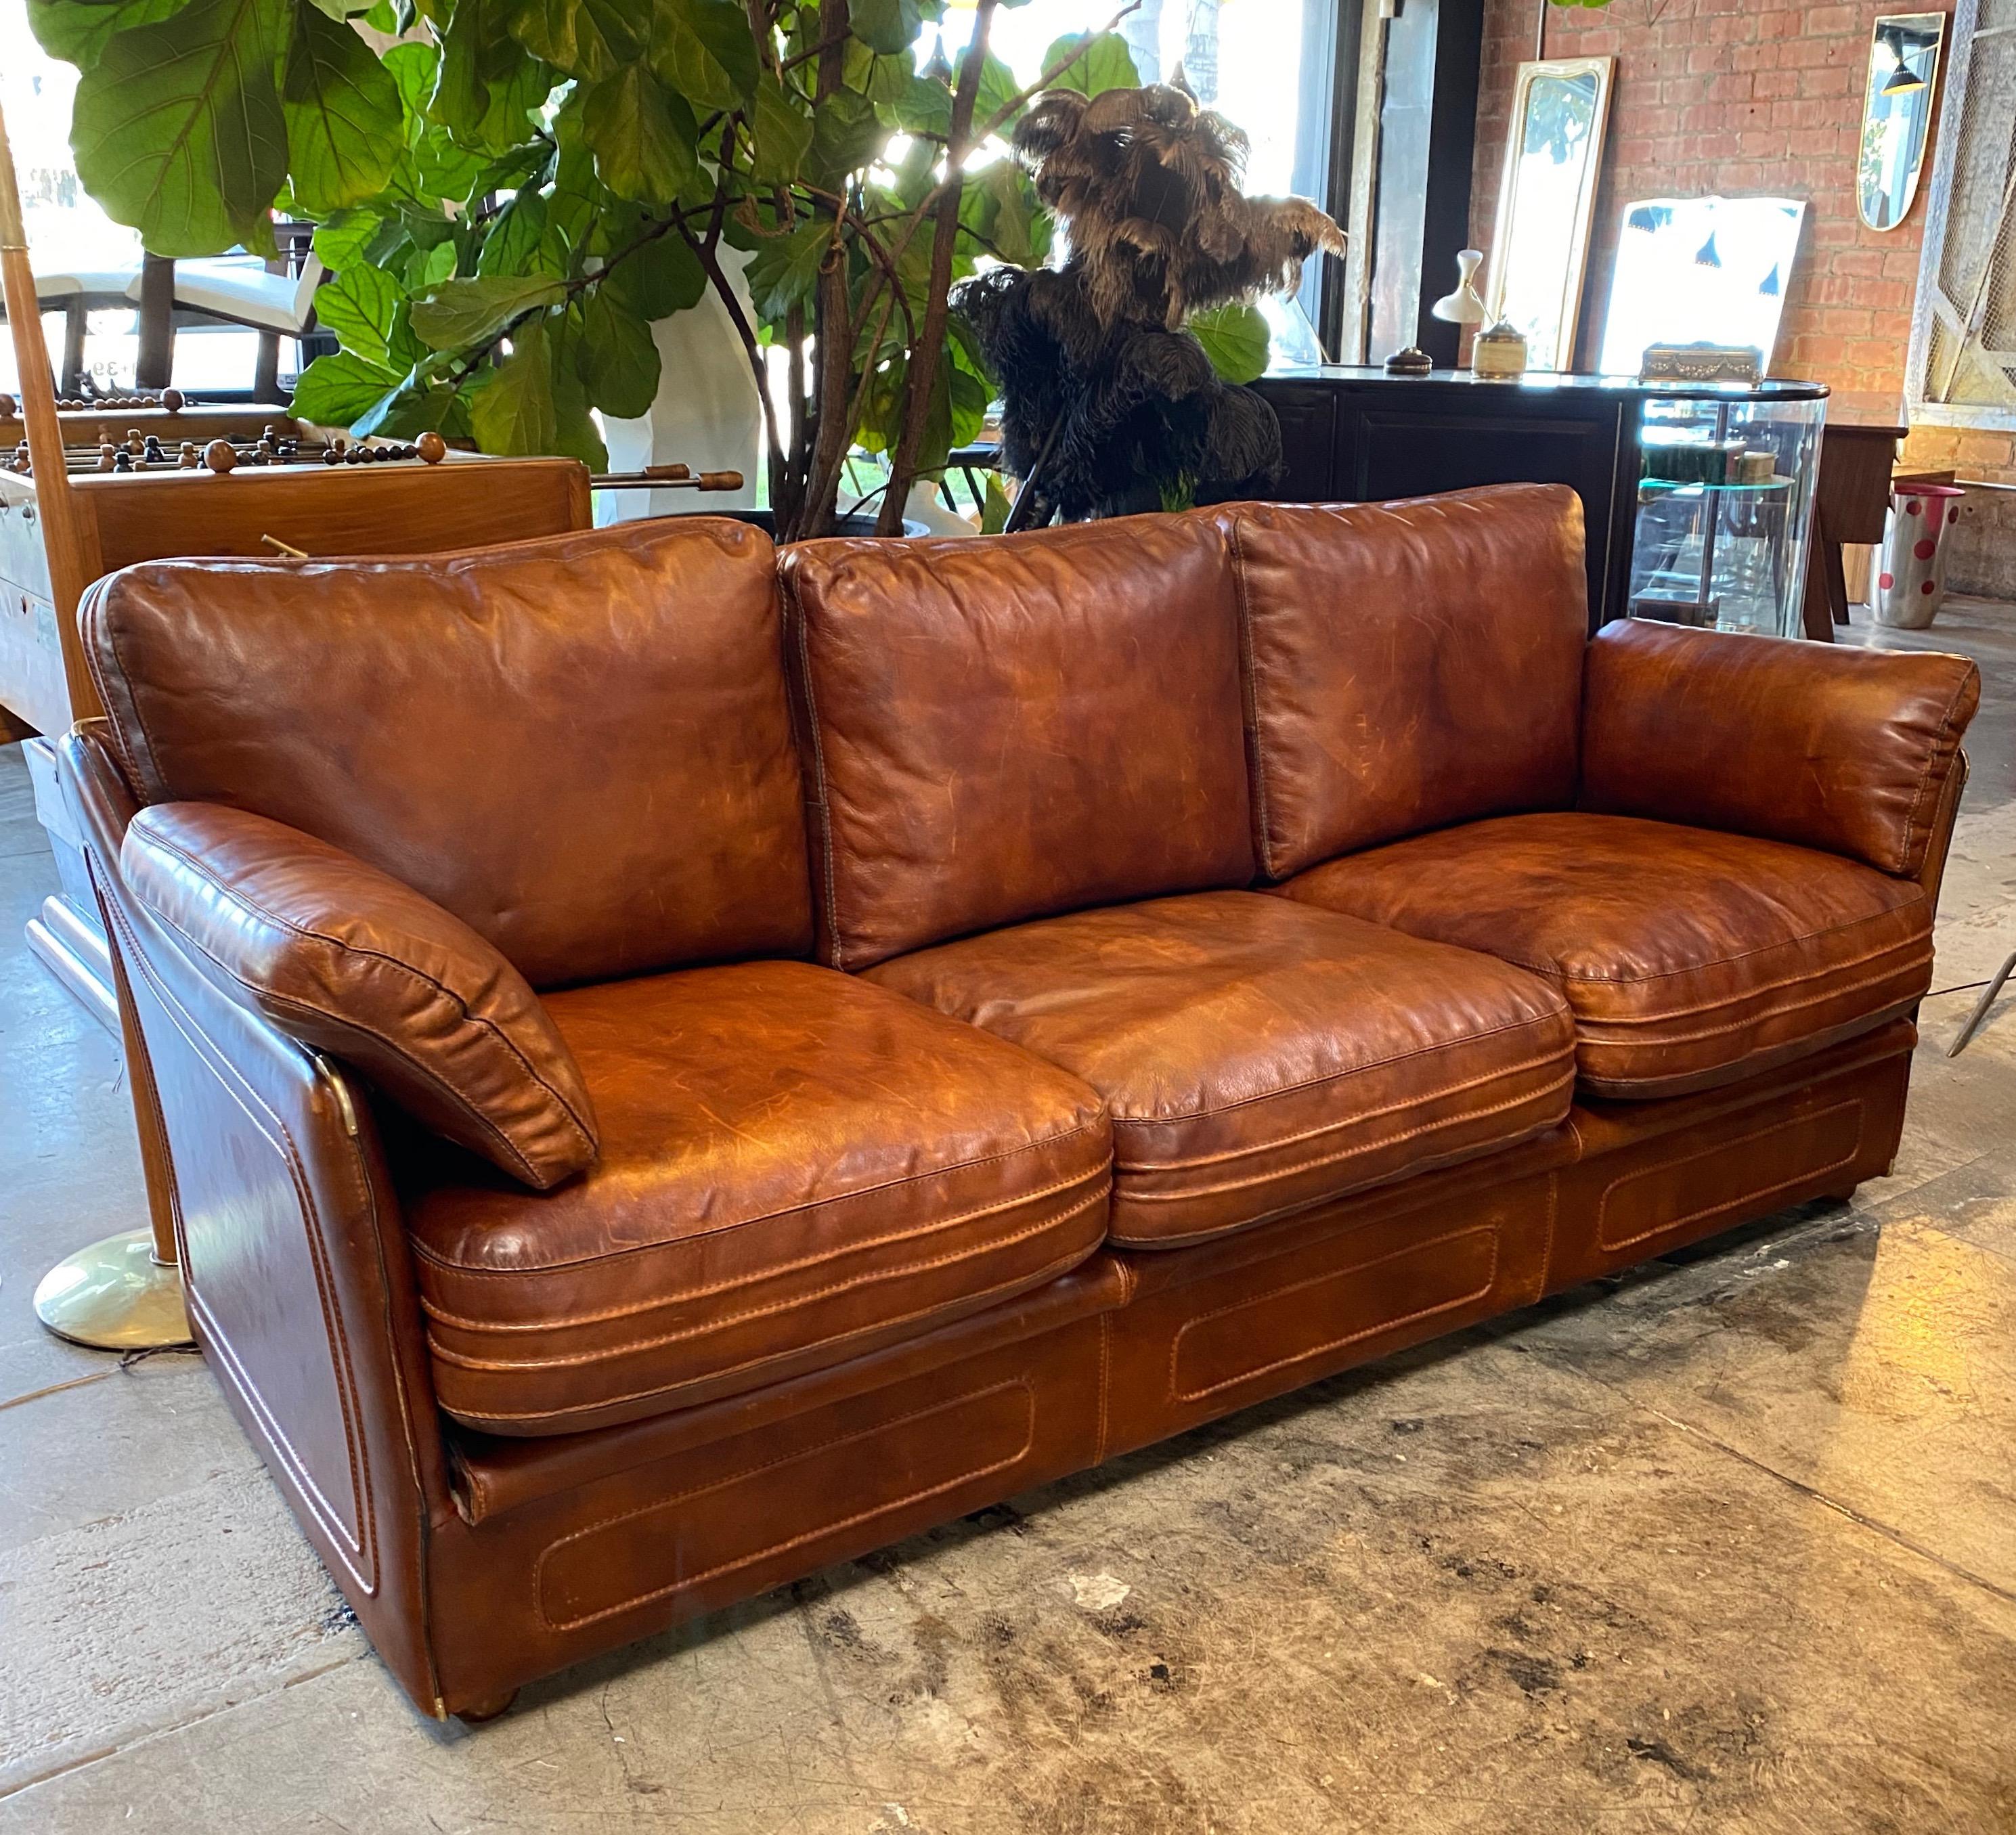 Mid-Century Modern Italian leather sofa, 1960s .The sofa is made out of high quality brown leather. The back and sit of the sofa is composed from three pillows. Armrests are covered with leather and have a soft stuffing in them for an extra